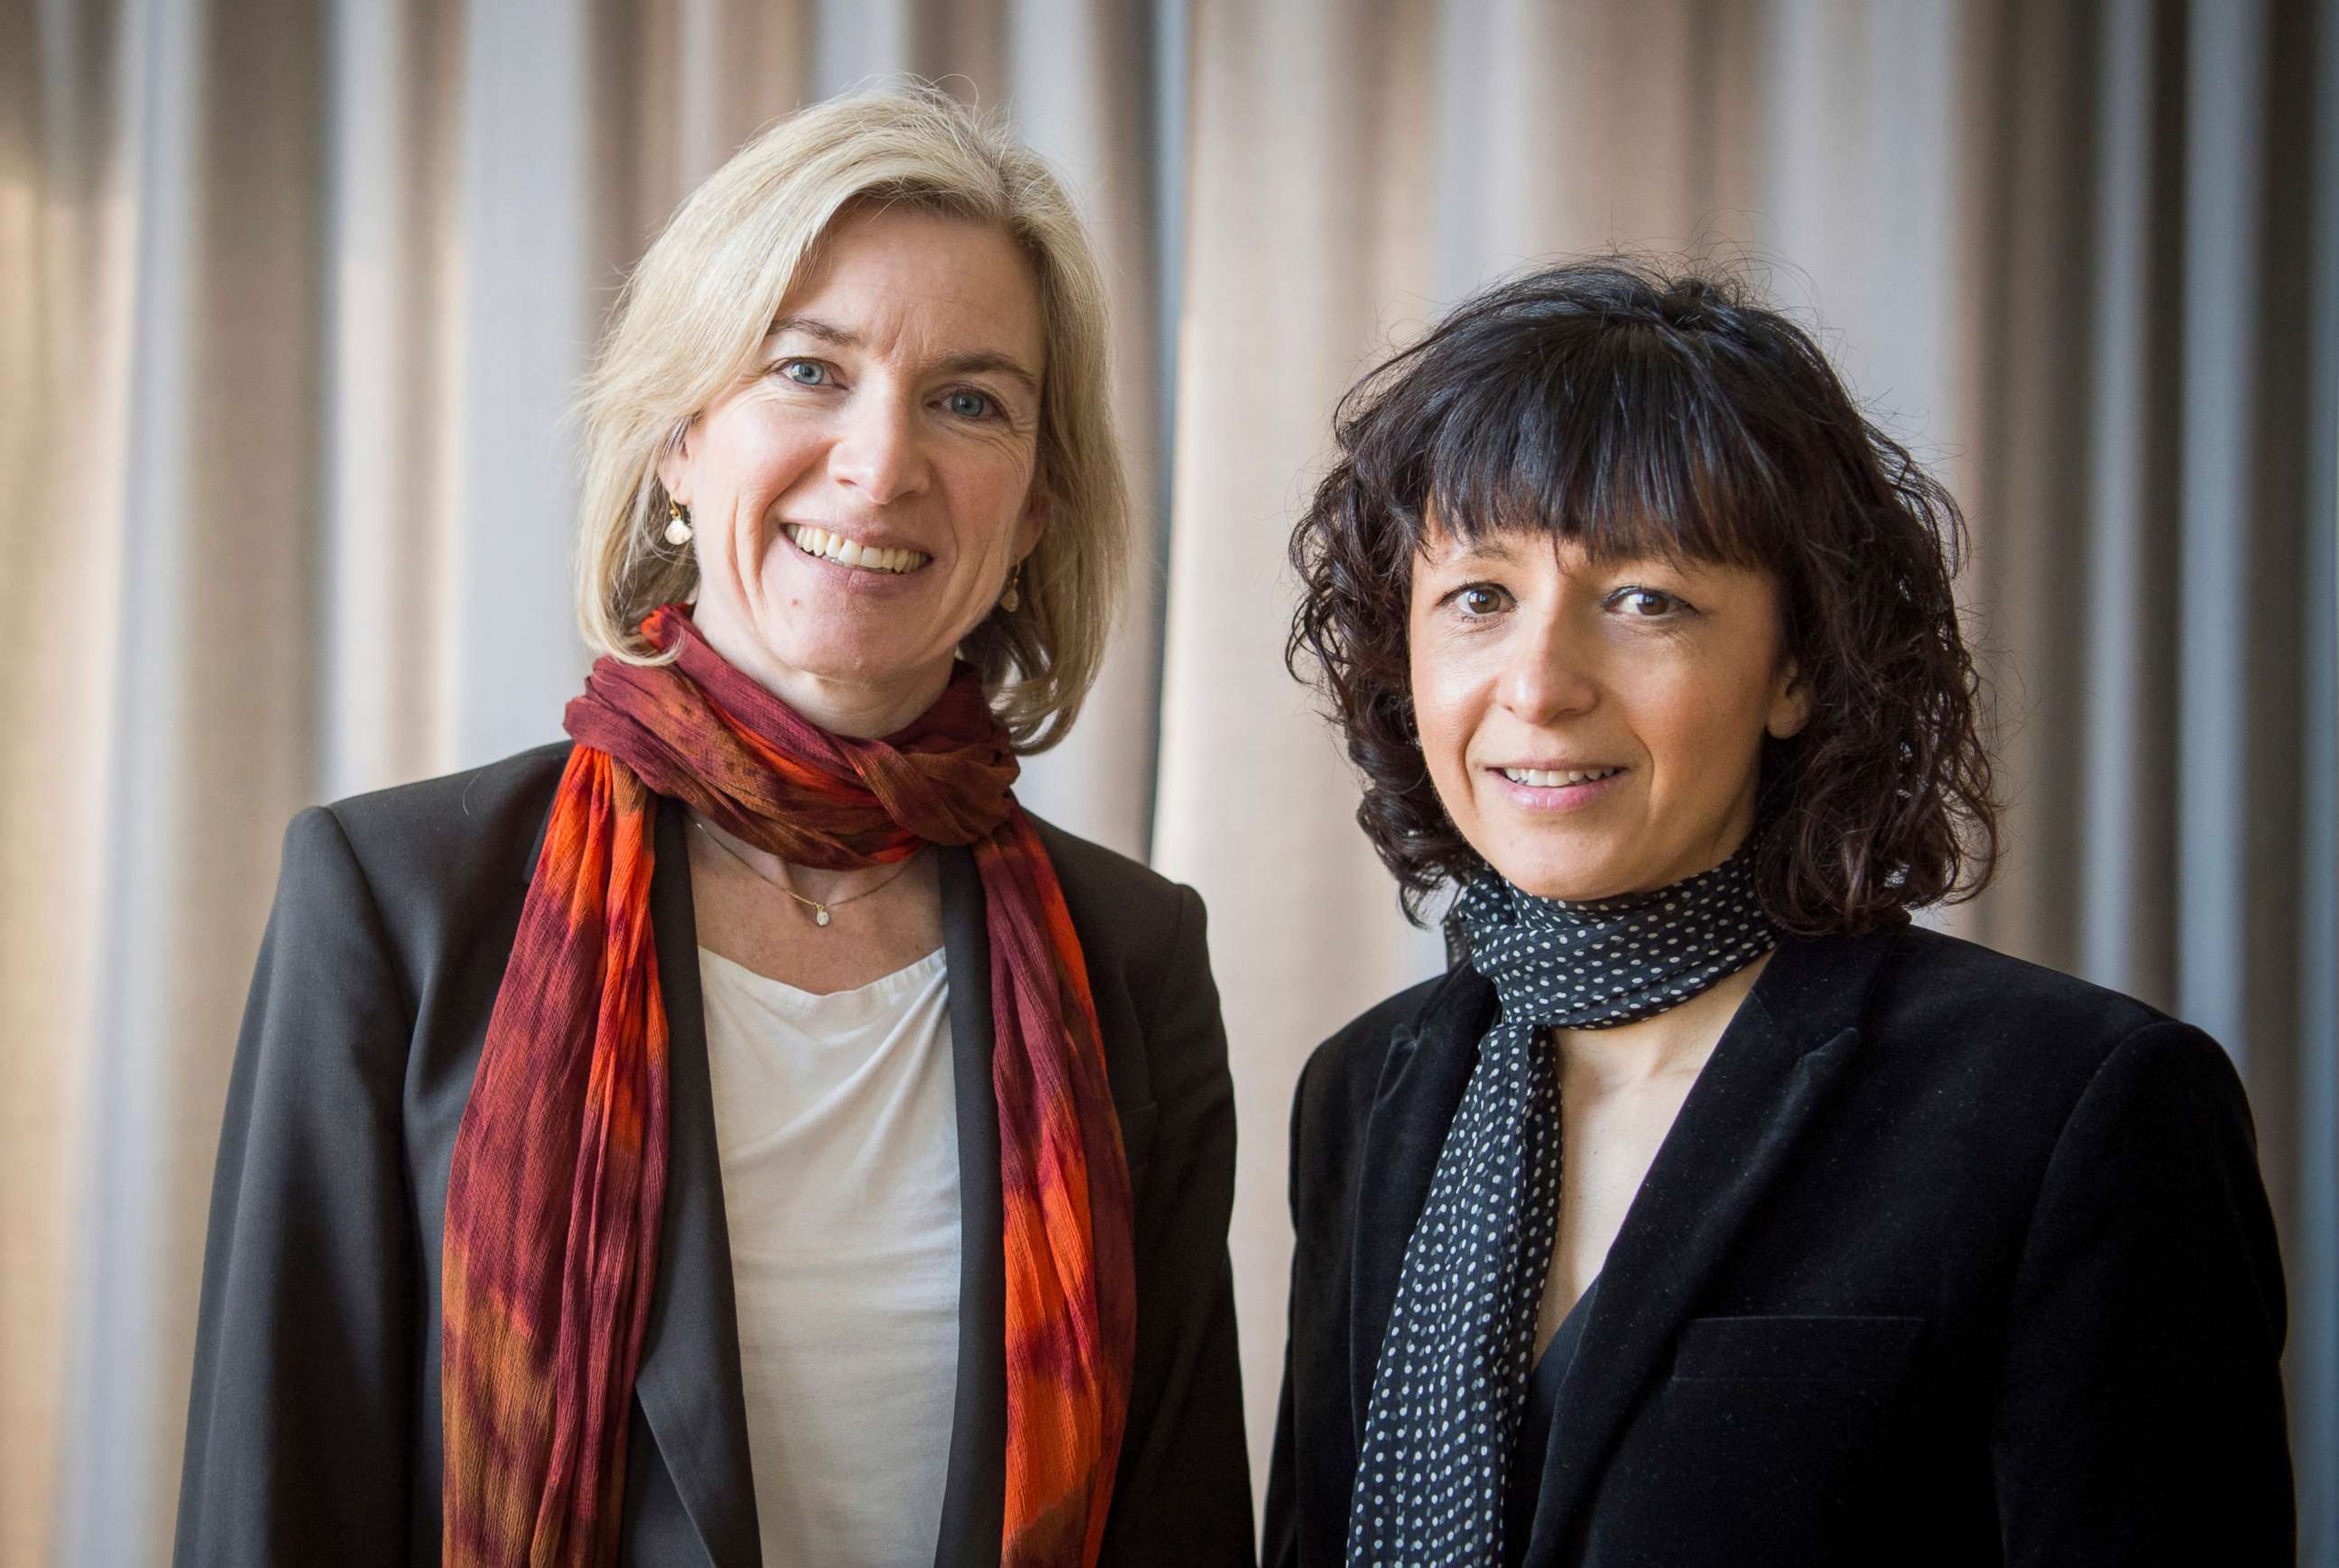 PHOTO:In this March 14, 2016 file photo American biochemist Jennifer A. Doudna, left, and the French microbiologist Emmanuelle Charpentier, right, poses for a photo in Frankfurt.